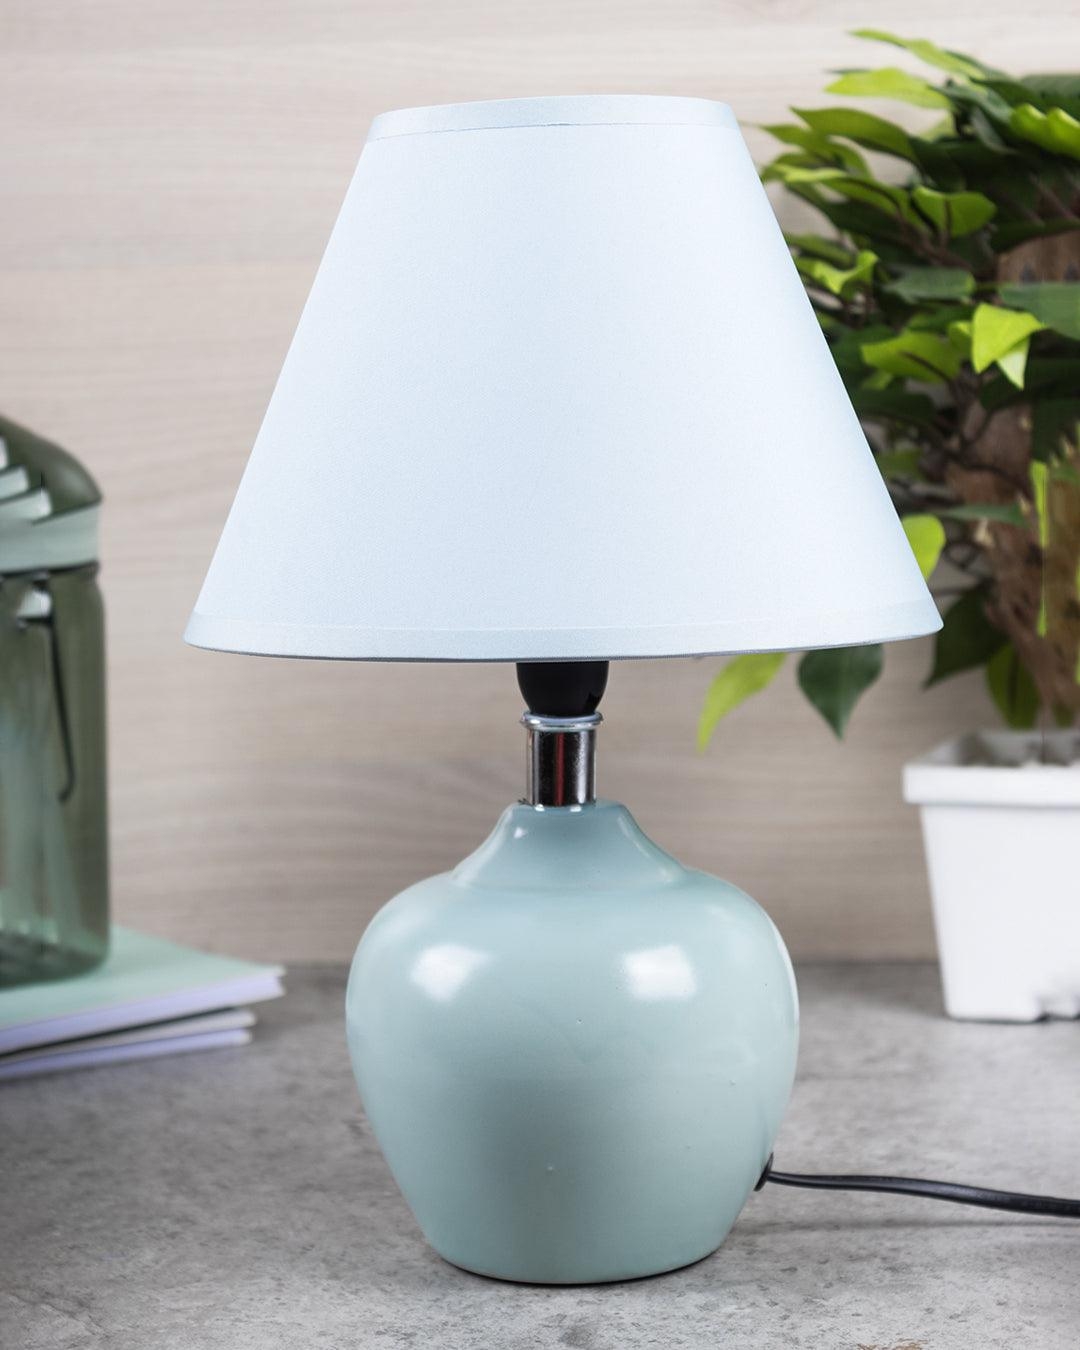 Market 99 | Market 99 Pyramid Shape Table Lamp Side Table for Living Room & Bedroom Diwali Christmas D�coration Lighting in Ceramic, Turquoise (20 X 20 X 30 cm)